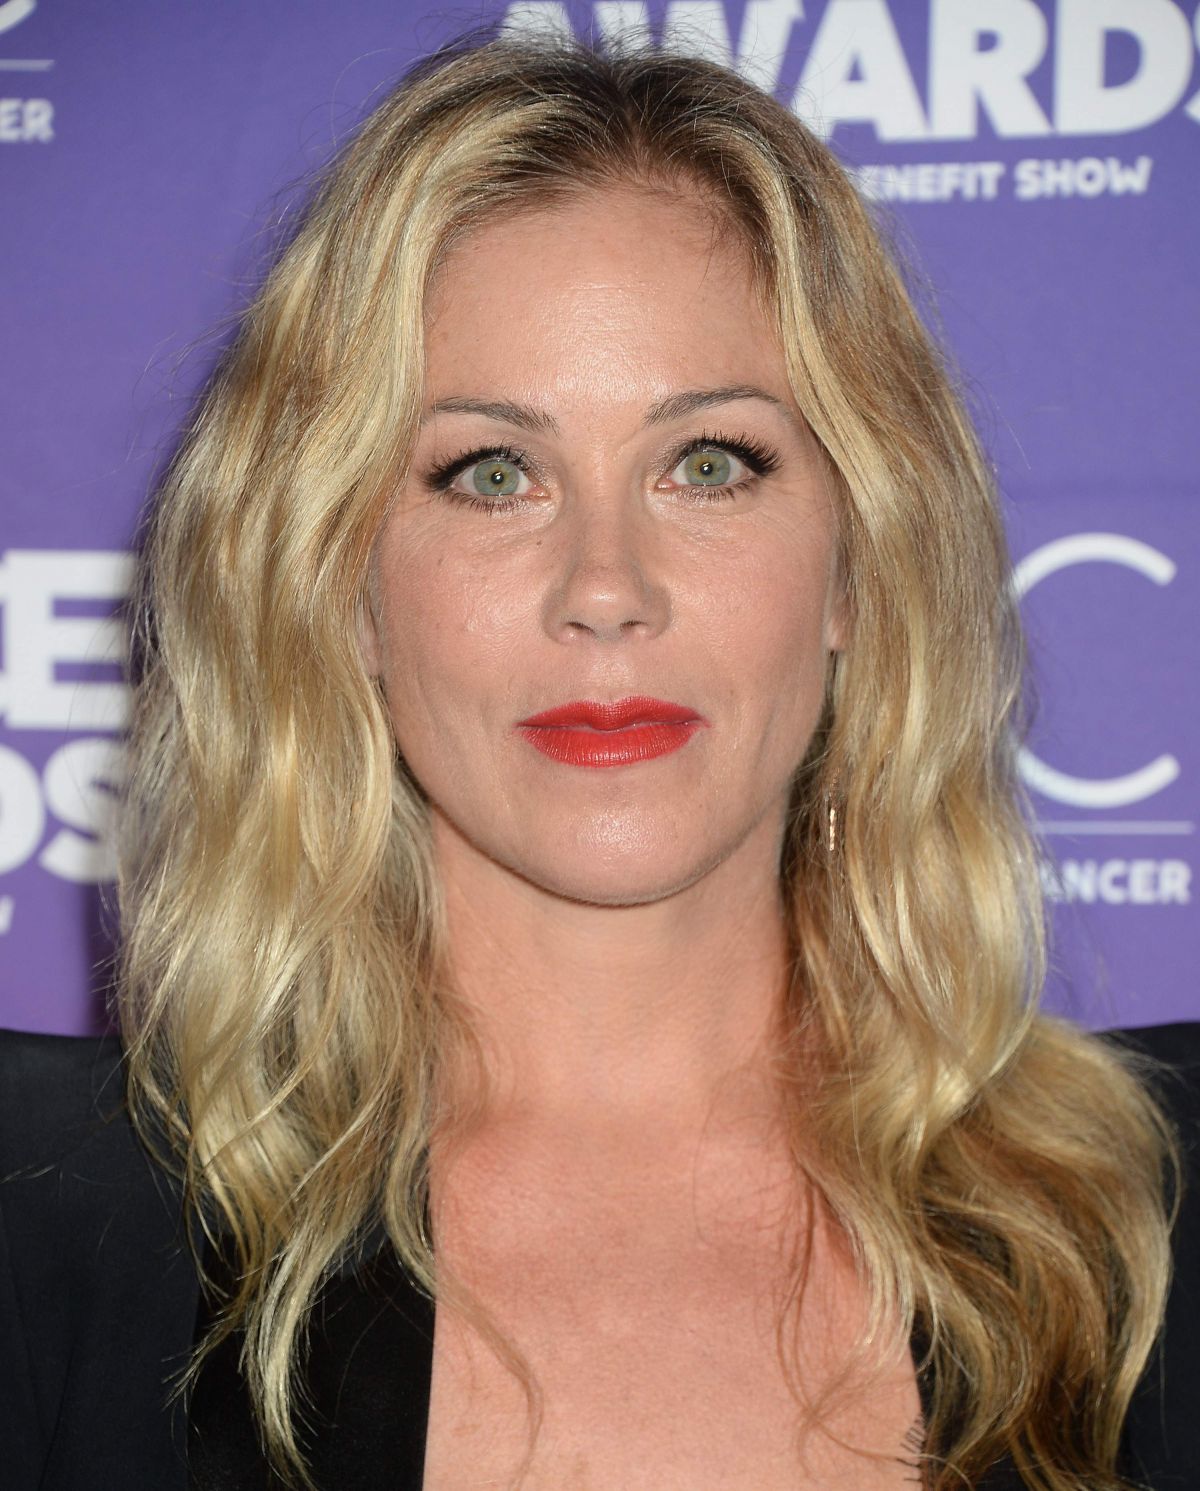 Collection 105+ Images recent photos of christina applegate Full HD, 2k, 4k